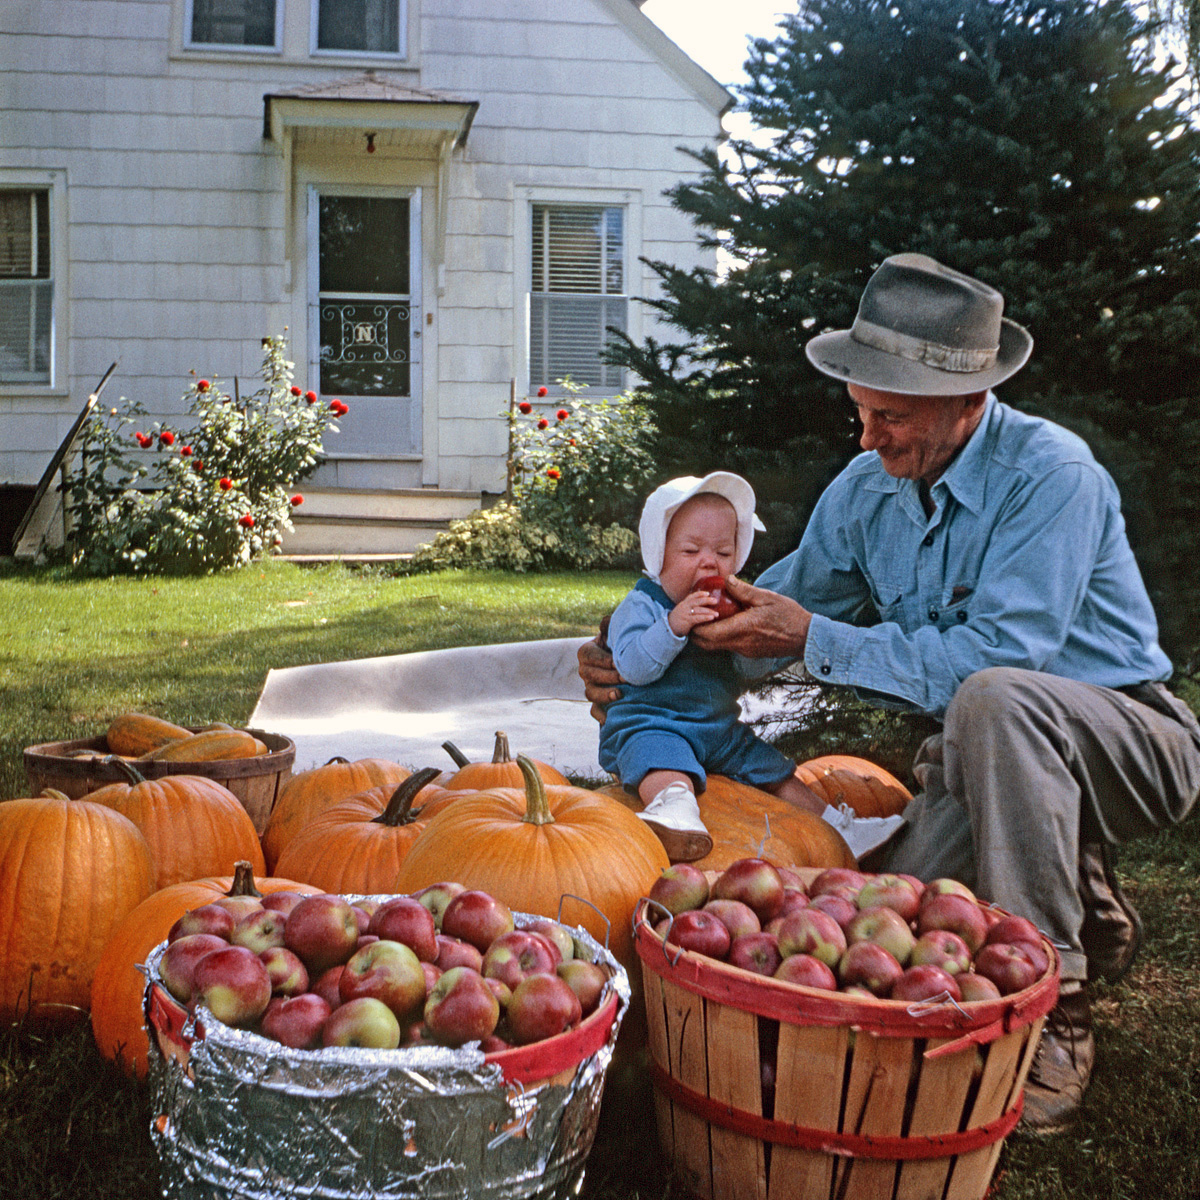 A friend is having me scan some of her family photos, and I fell in love with this Kodachrome slide; she gave me permission to post it to Shorpy. It's her sister and their great-grandfather on his farm in Sabattus, Maine, in 1964. View full size.